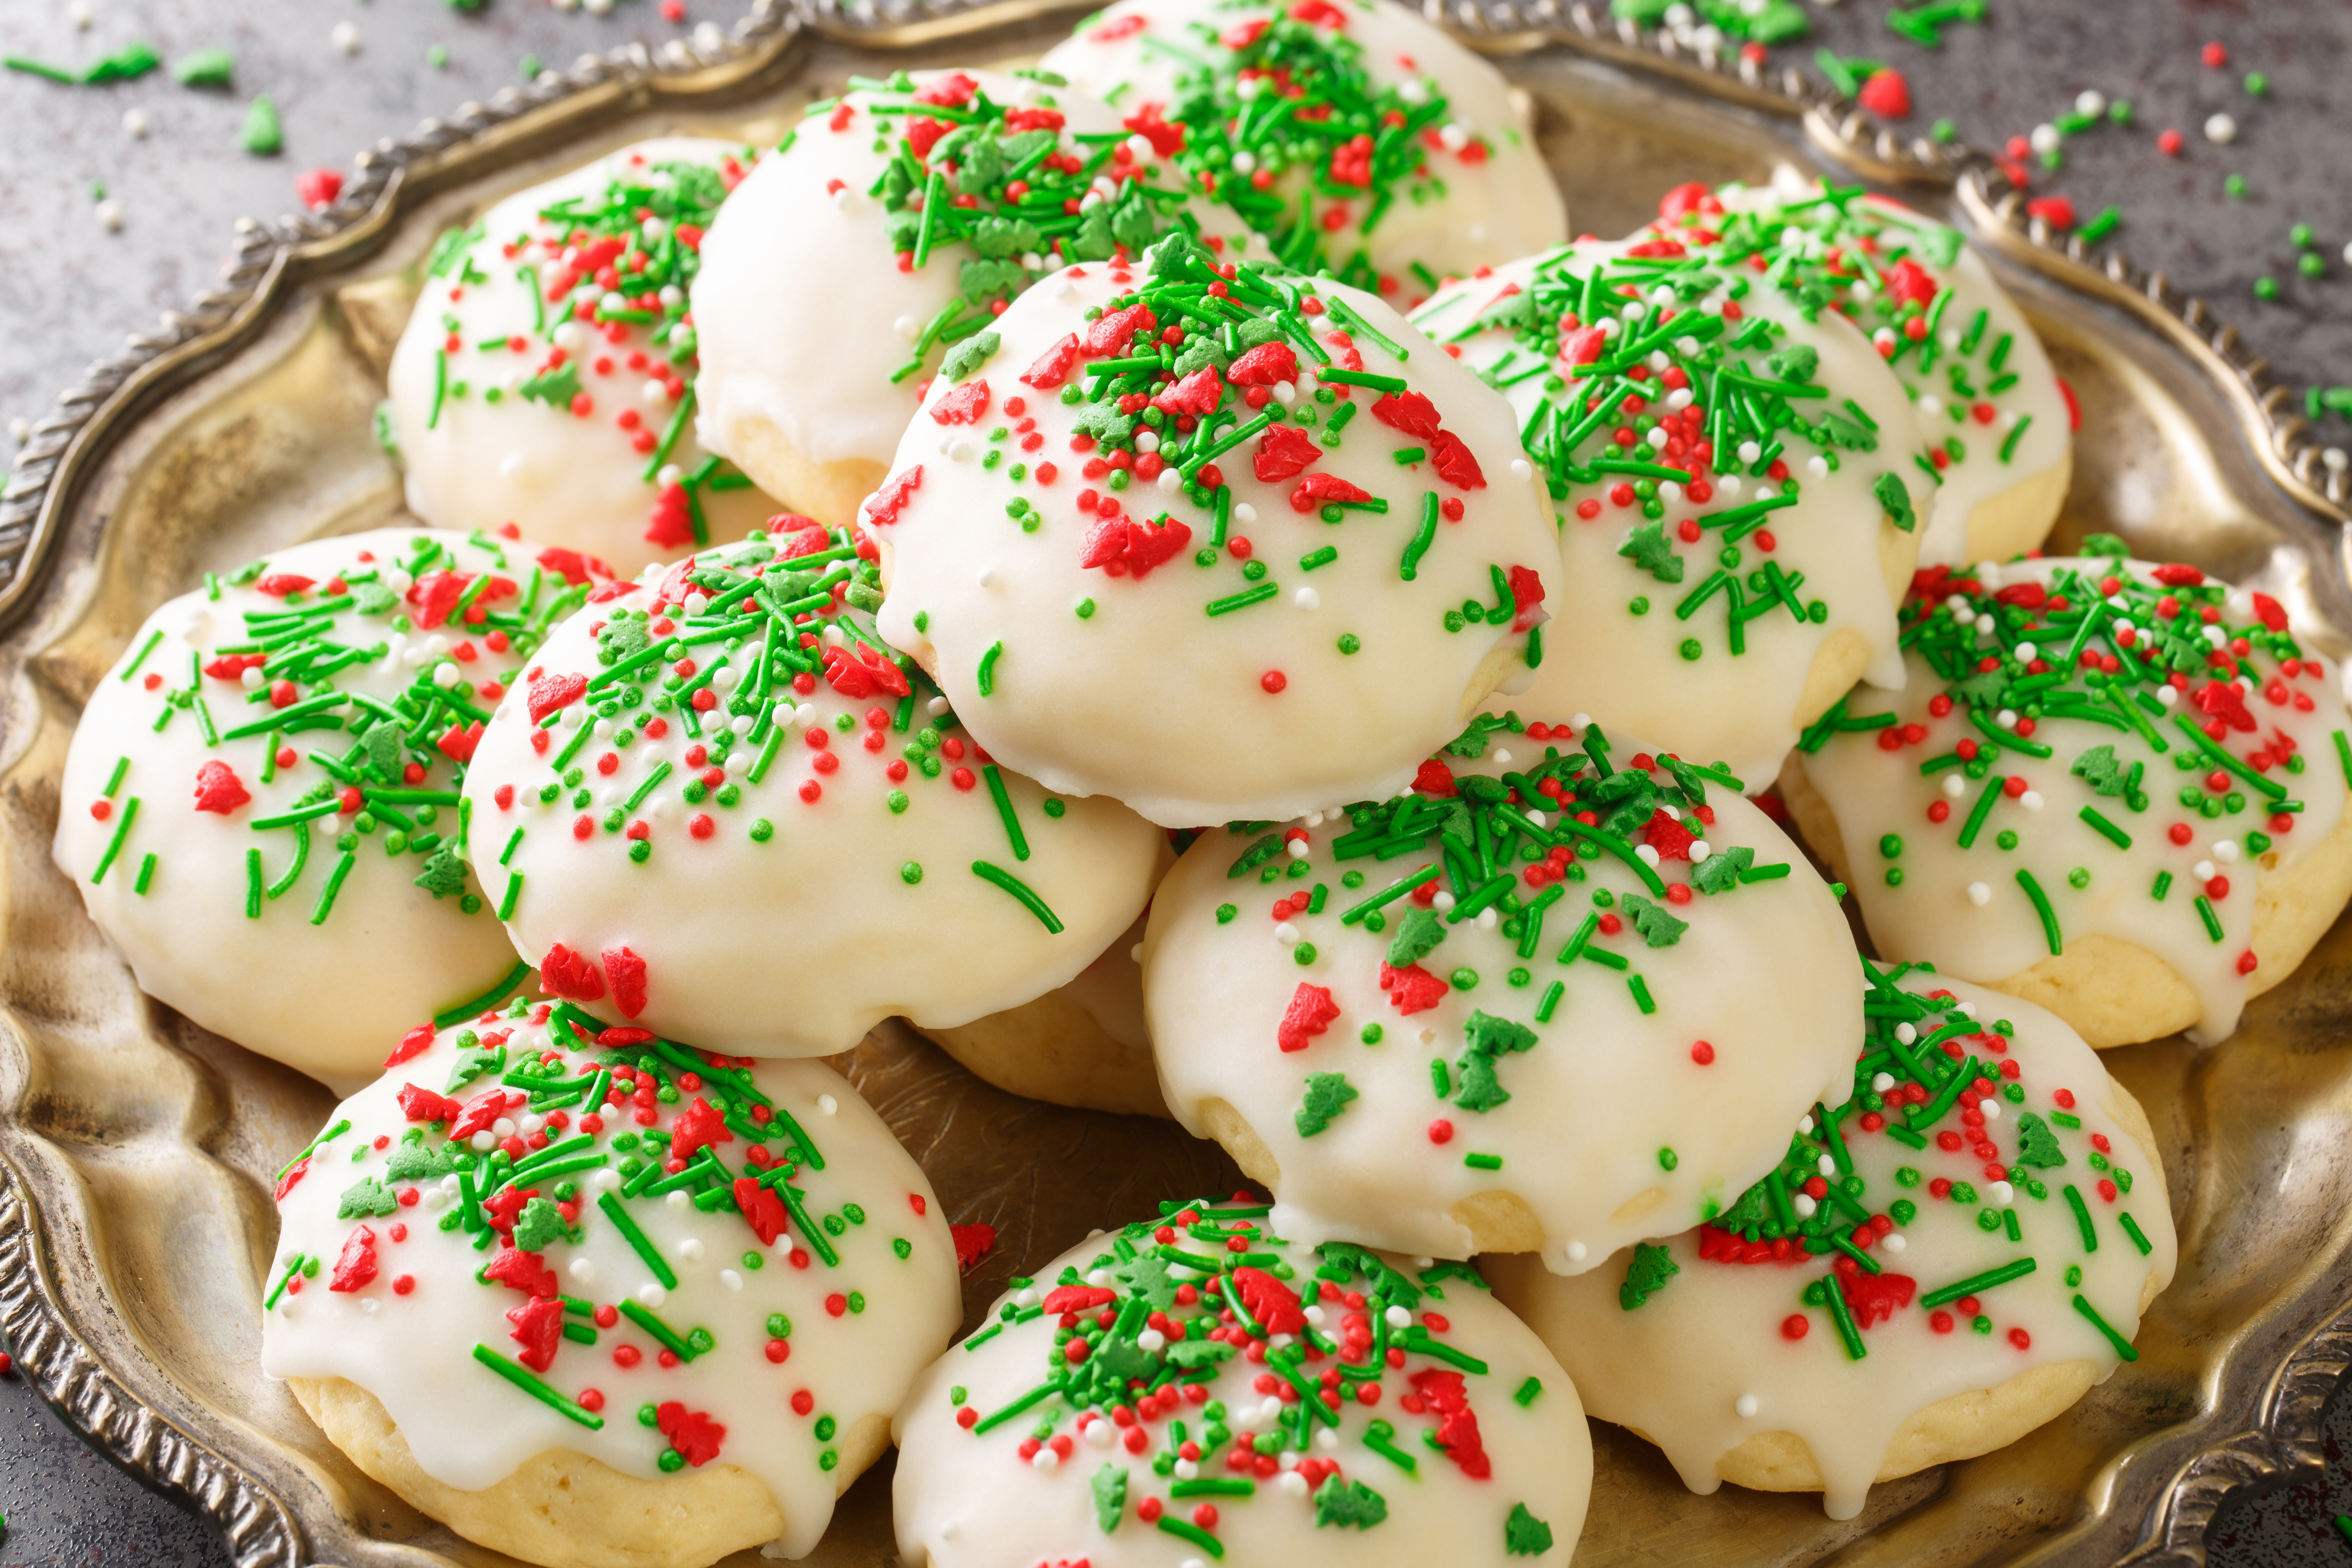 Plate of frosted cookies with red and green sprinkles, festive holiday treat